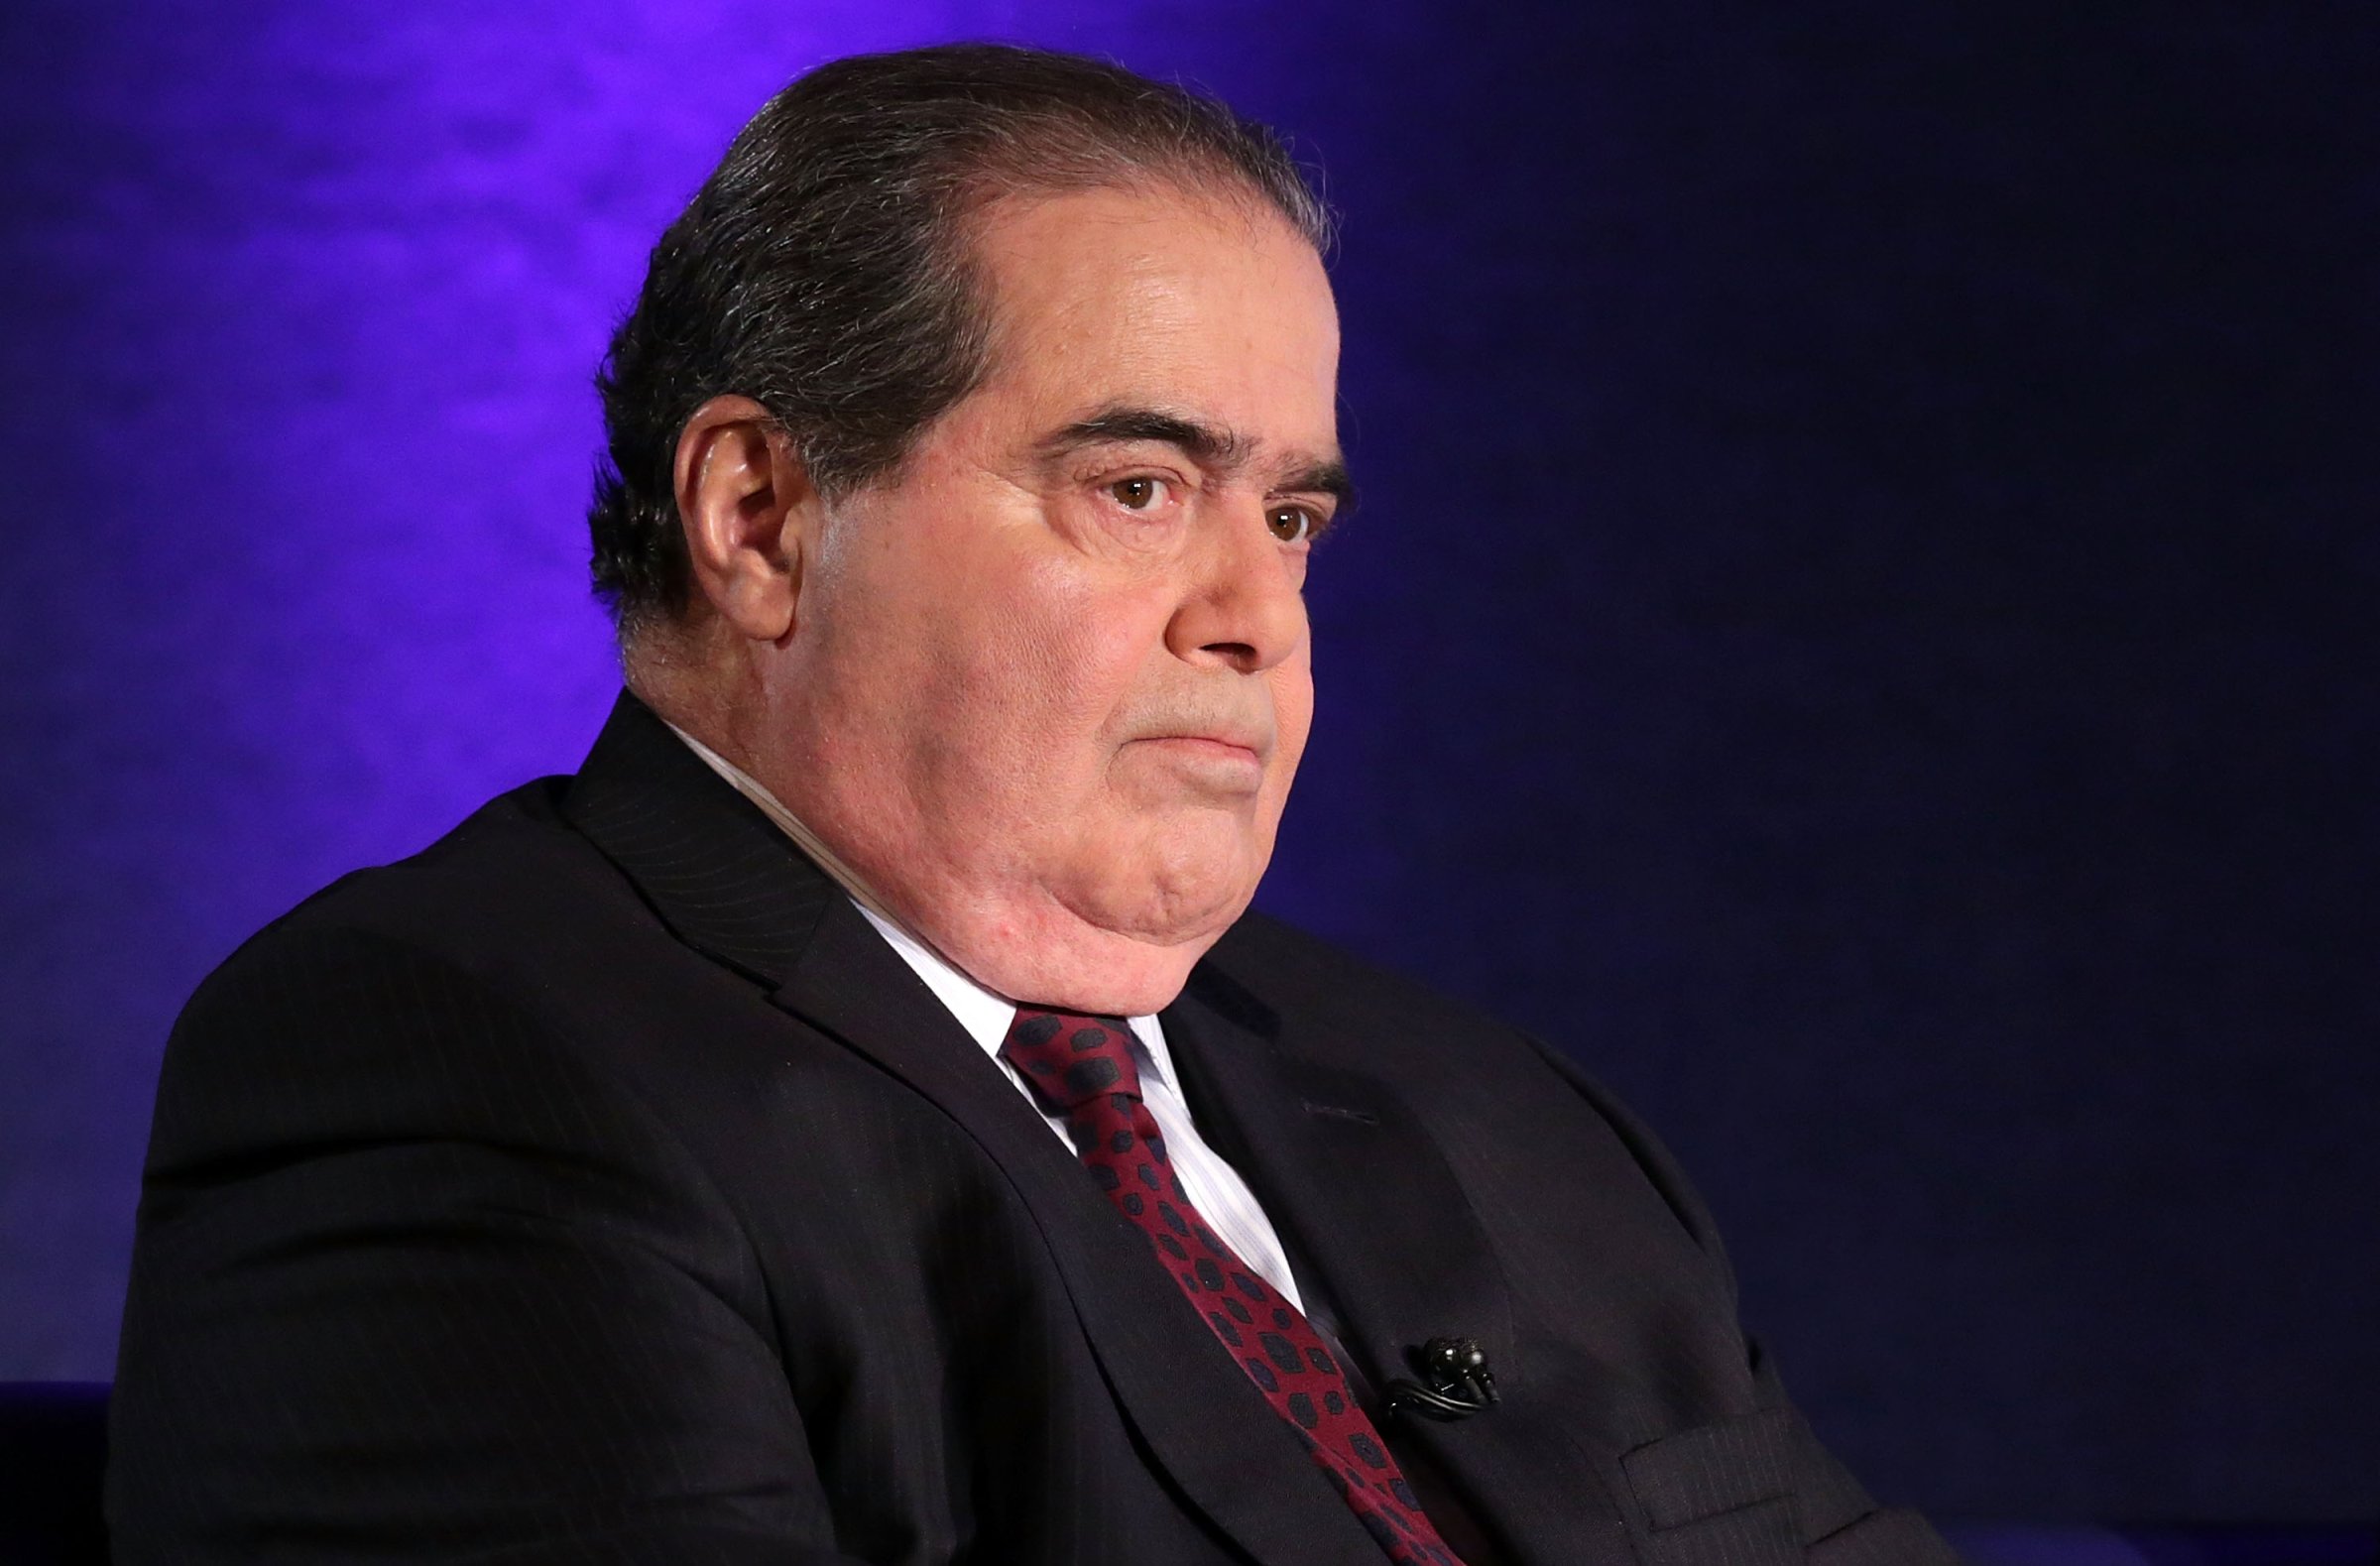 Supreme Court Justice Antonin Scalia waits for the beginning of the taping of "The Kalb Report" at the National Press Club in Washington, DC, on April 17, 2014.